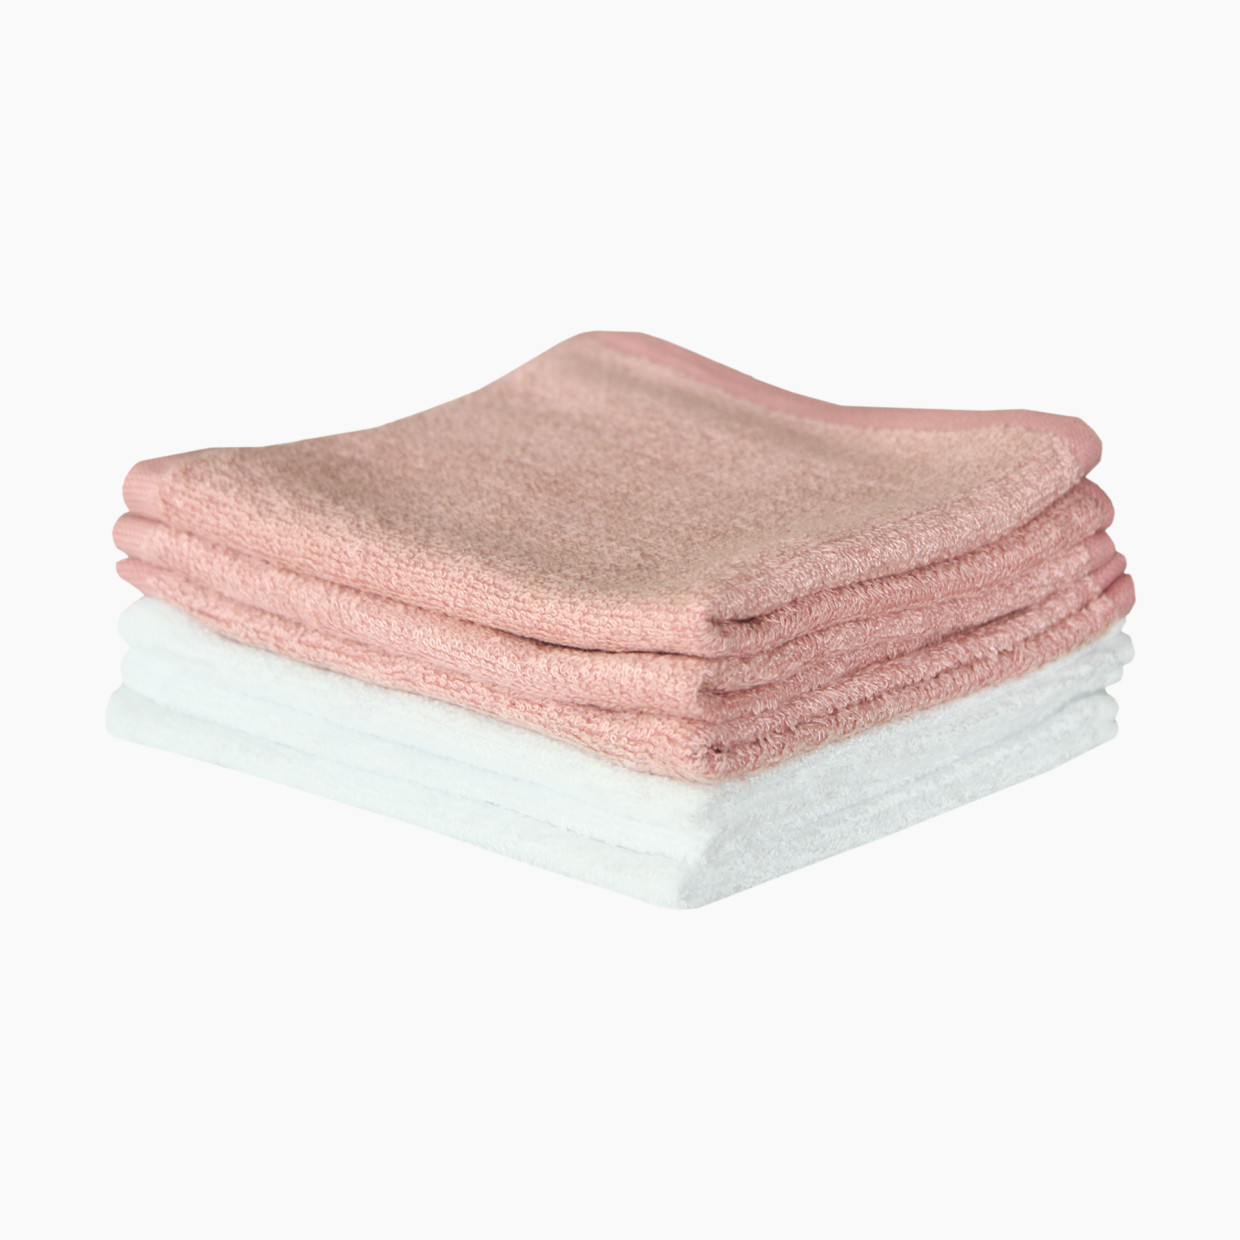 Copper Pearl Ultra Soft Washcloth (6 Pack) - White/Pink.